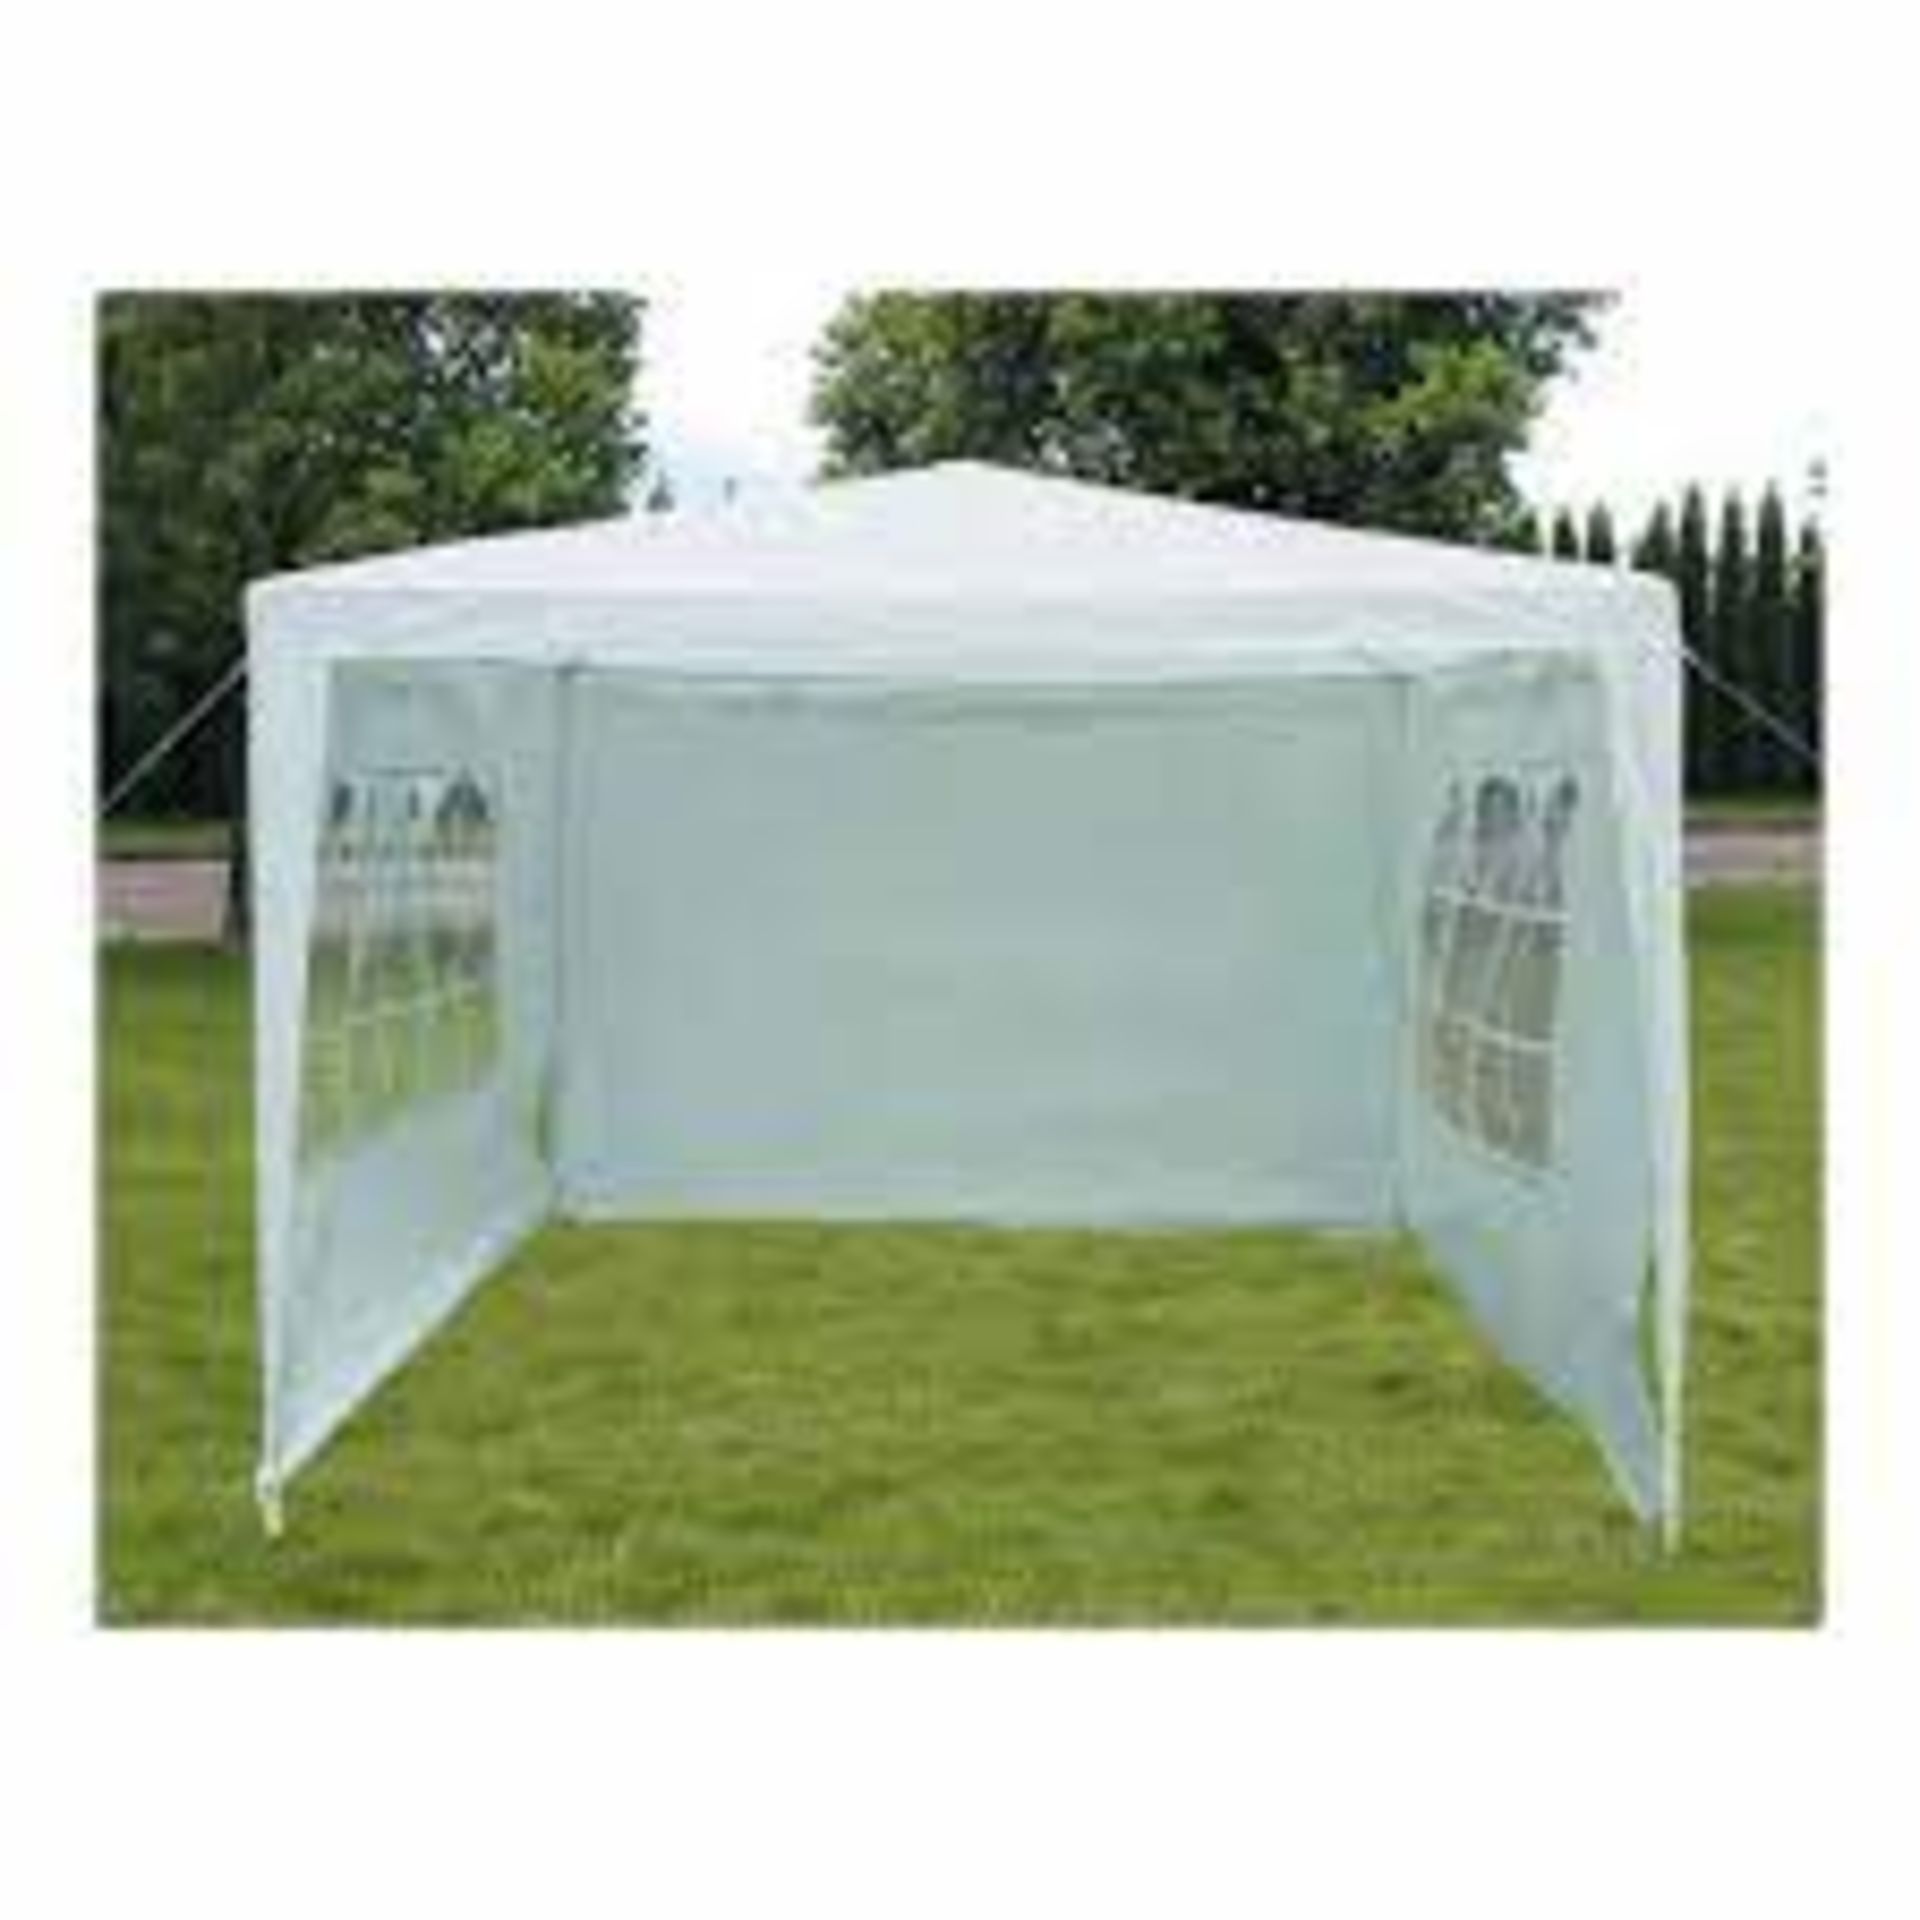 BOXED CHARLES BENTLEY 3X3M GAZEBO WITH 3 SIDE WALLS (AS SEEN IN WAYFAIR)Condition ReportAppraisal